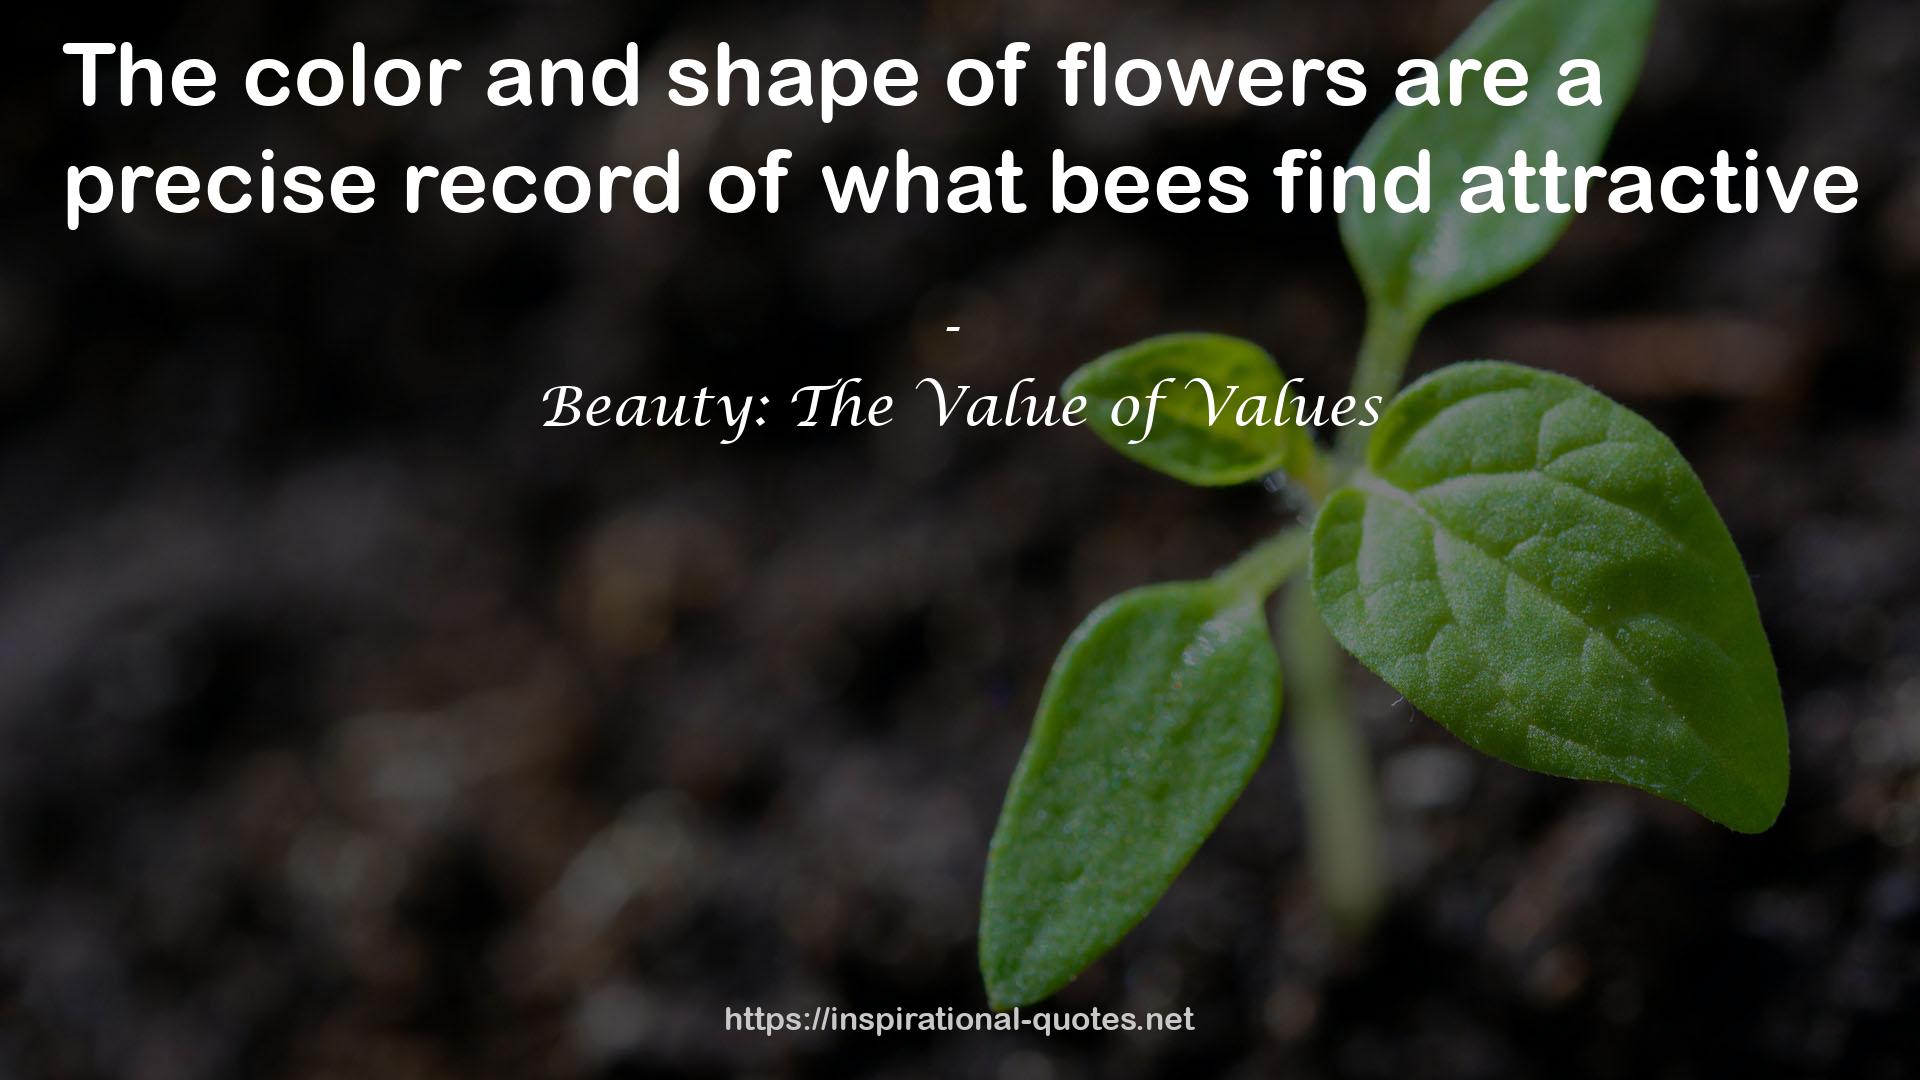 Beauty: The Value of Values QUOTES